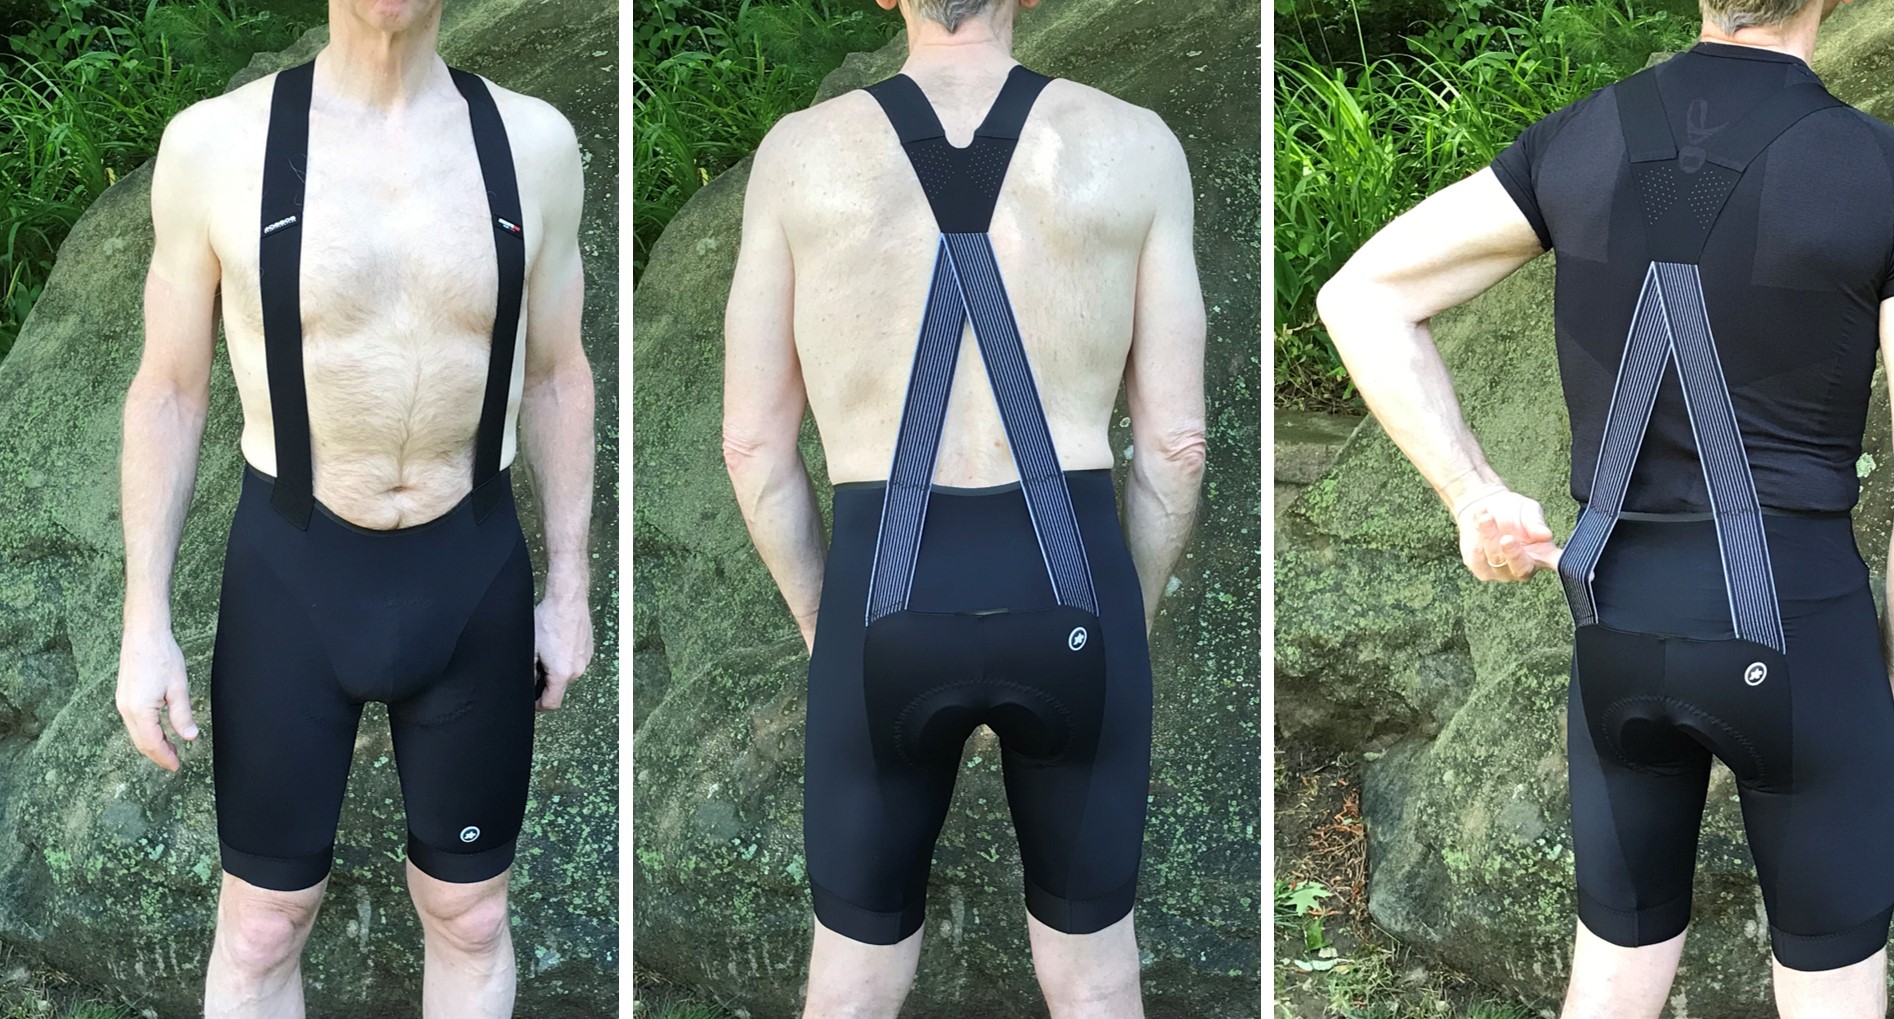 New Bib Shorts and Jerseys I Like - In The Know Cycling